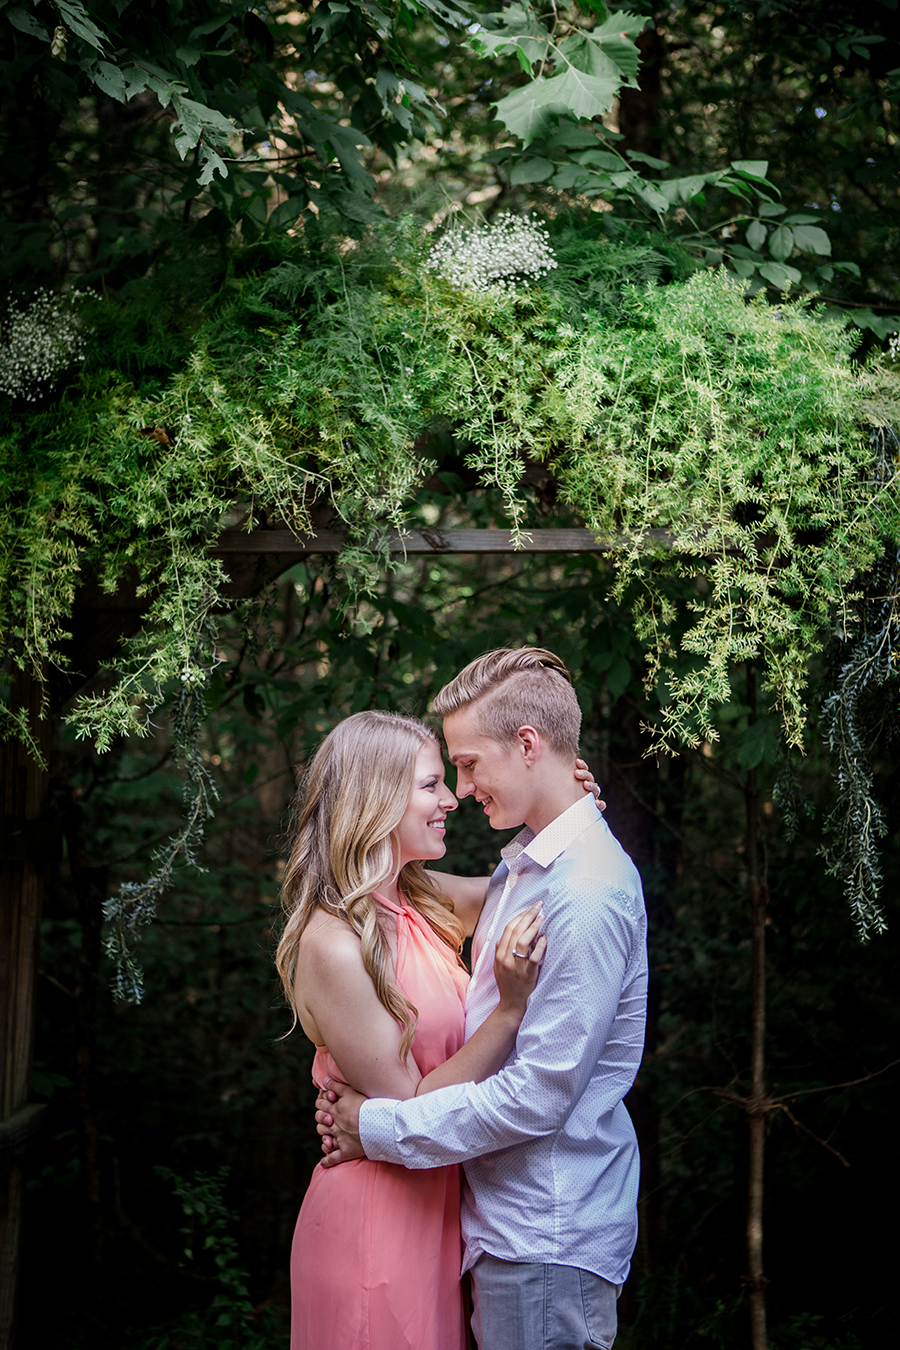 Under the vines by Knoxville Wedding Photographer, Amanda May Photos.